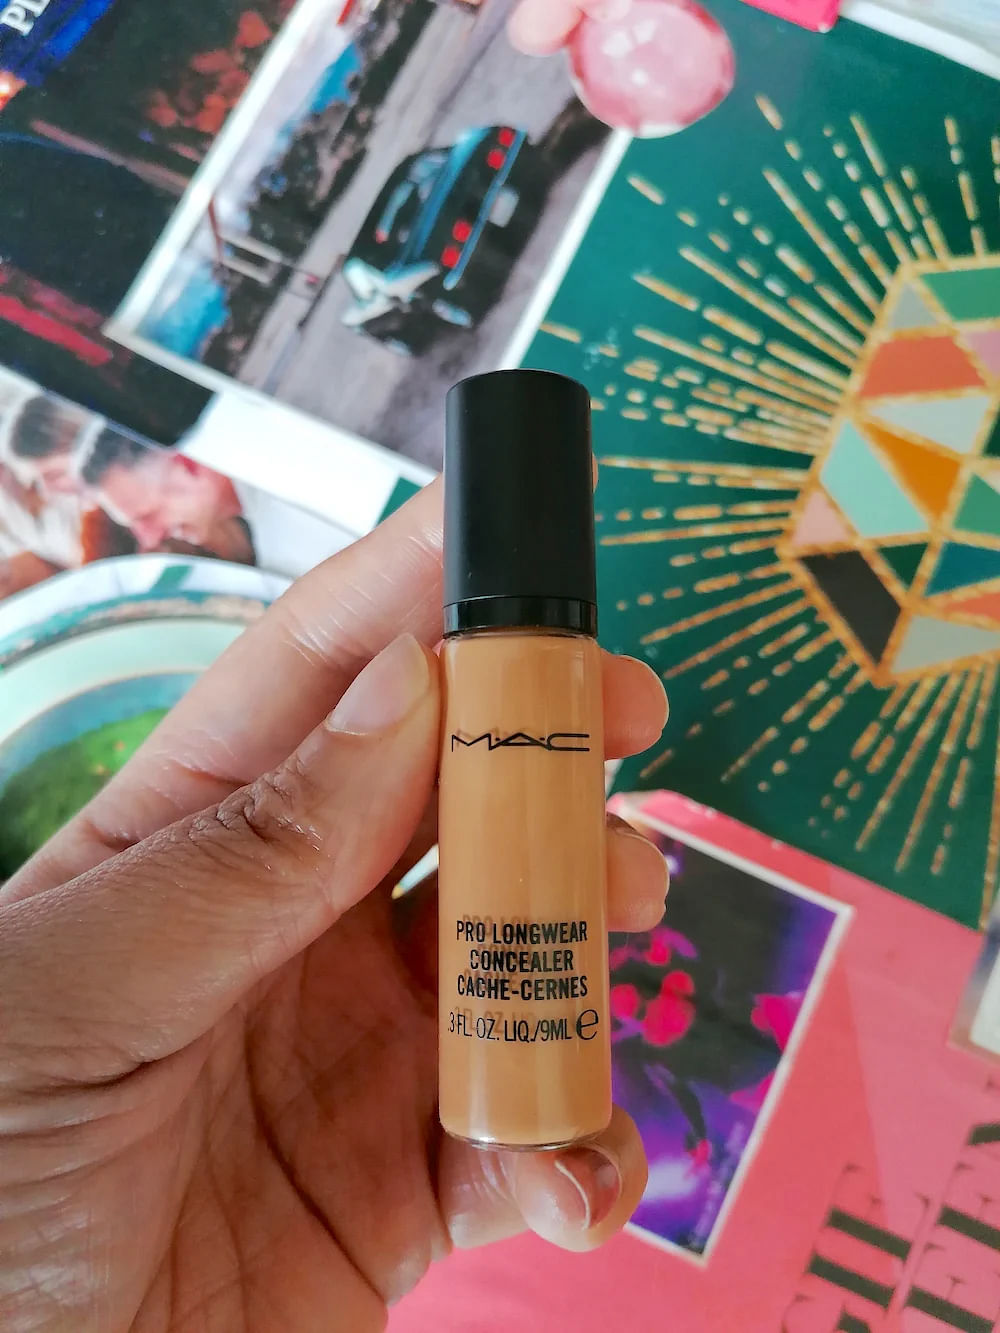 Concealer review: is this the best ever concealer?